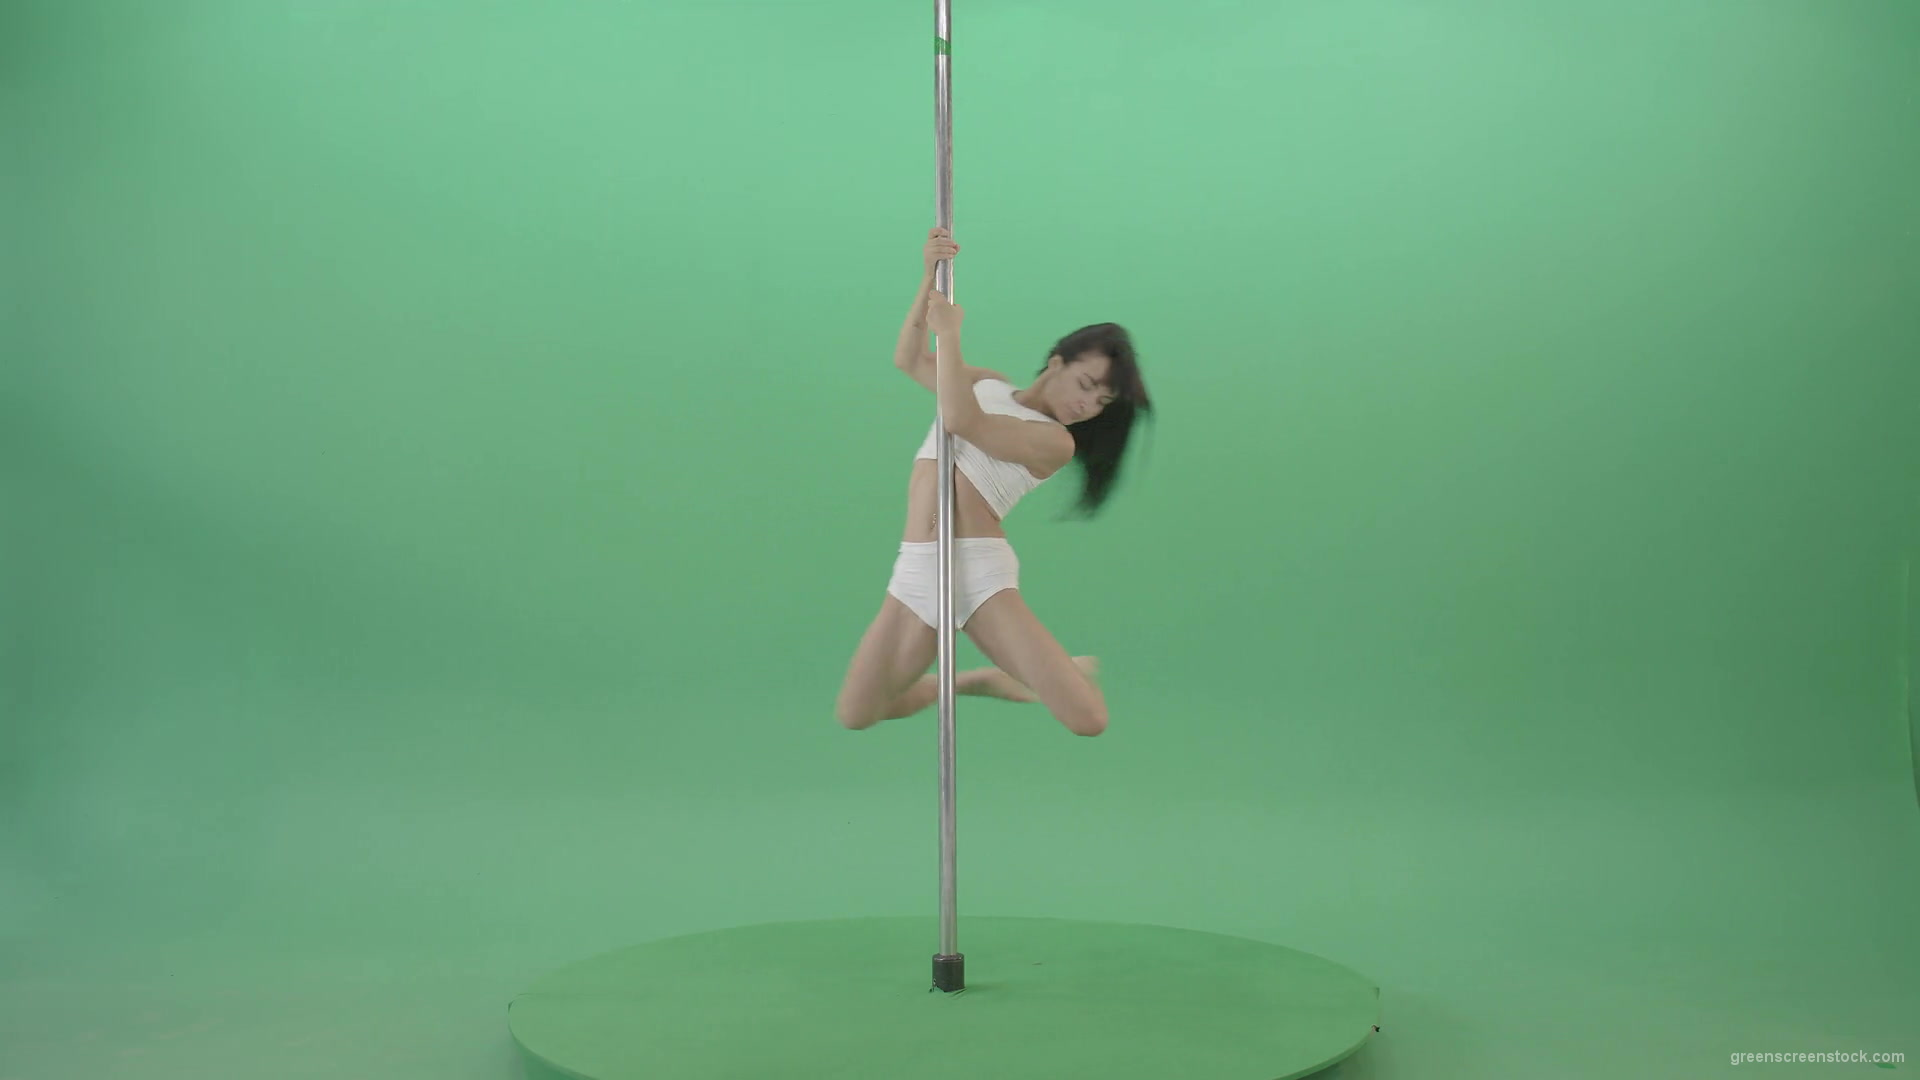 Green-Screen-Woman-spinning-gracefully-on-pole-dance-Video-Footage-1920_007 Green Screen Stock